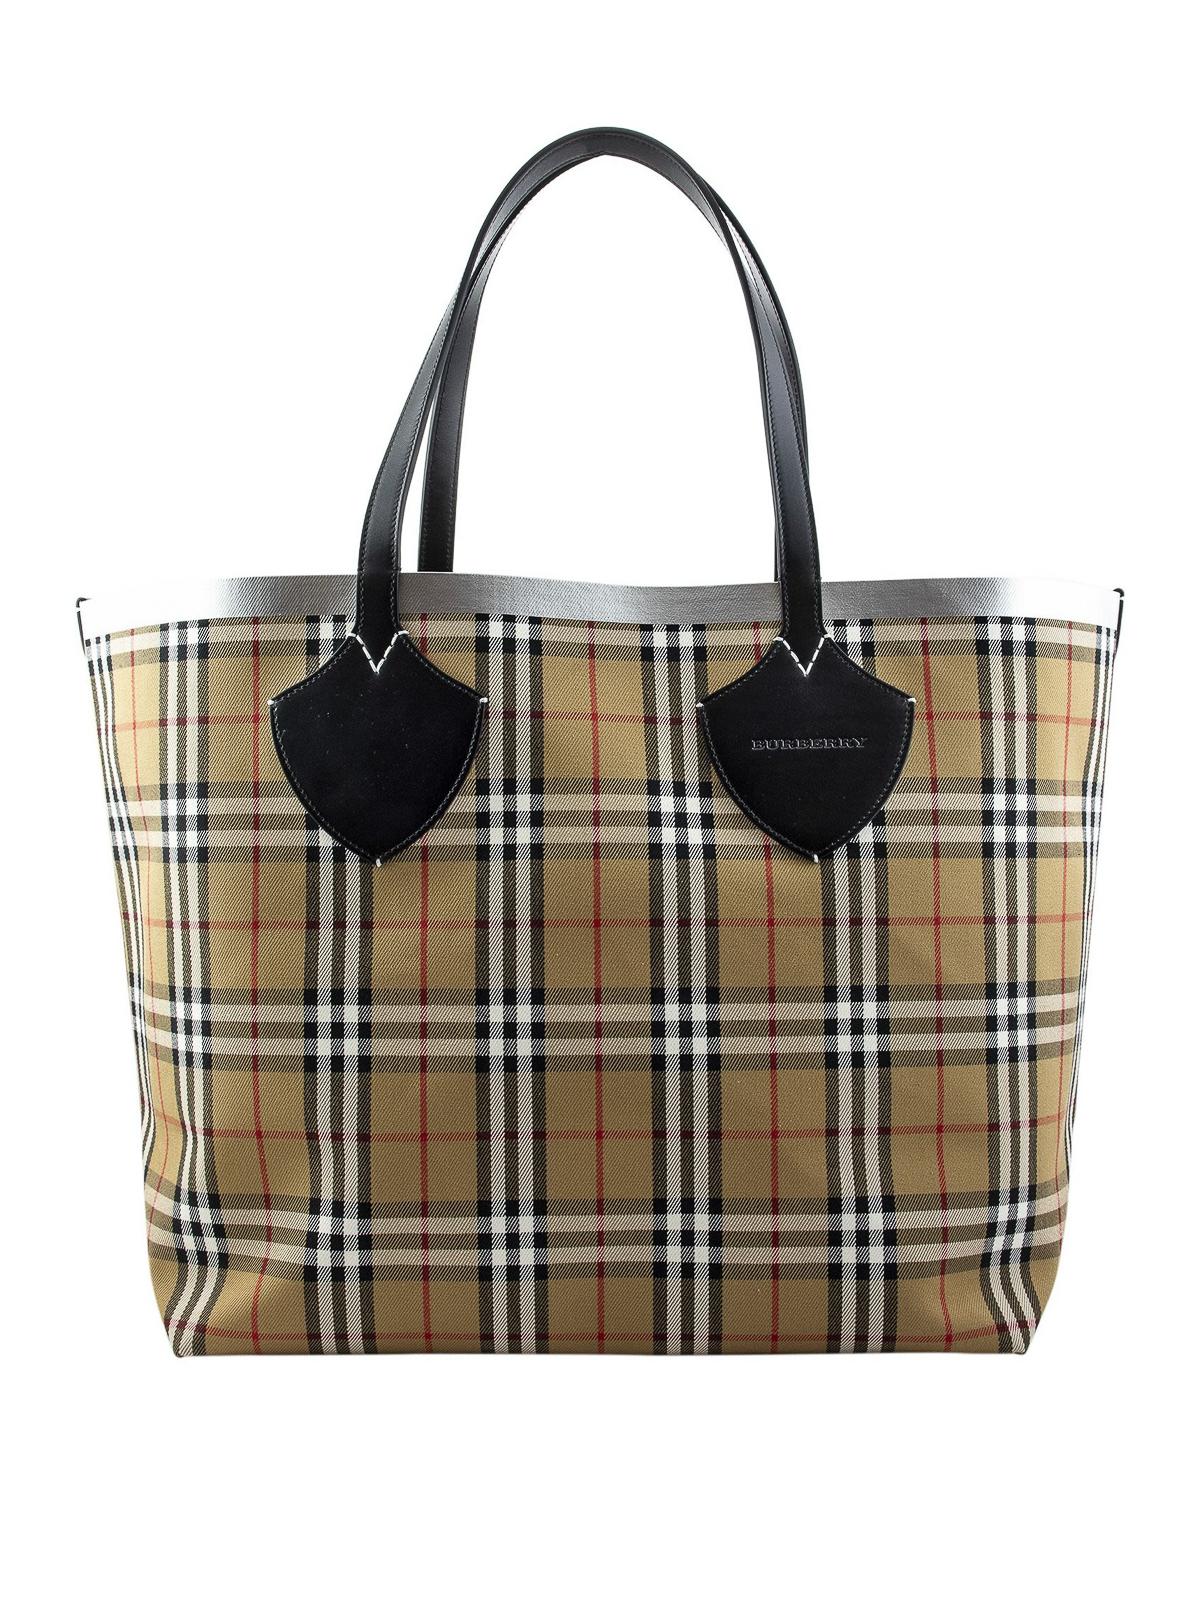 Burberry The Giant Vintage Check Cotton Tote Bag in Beige (Natural) - Lyst